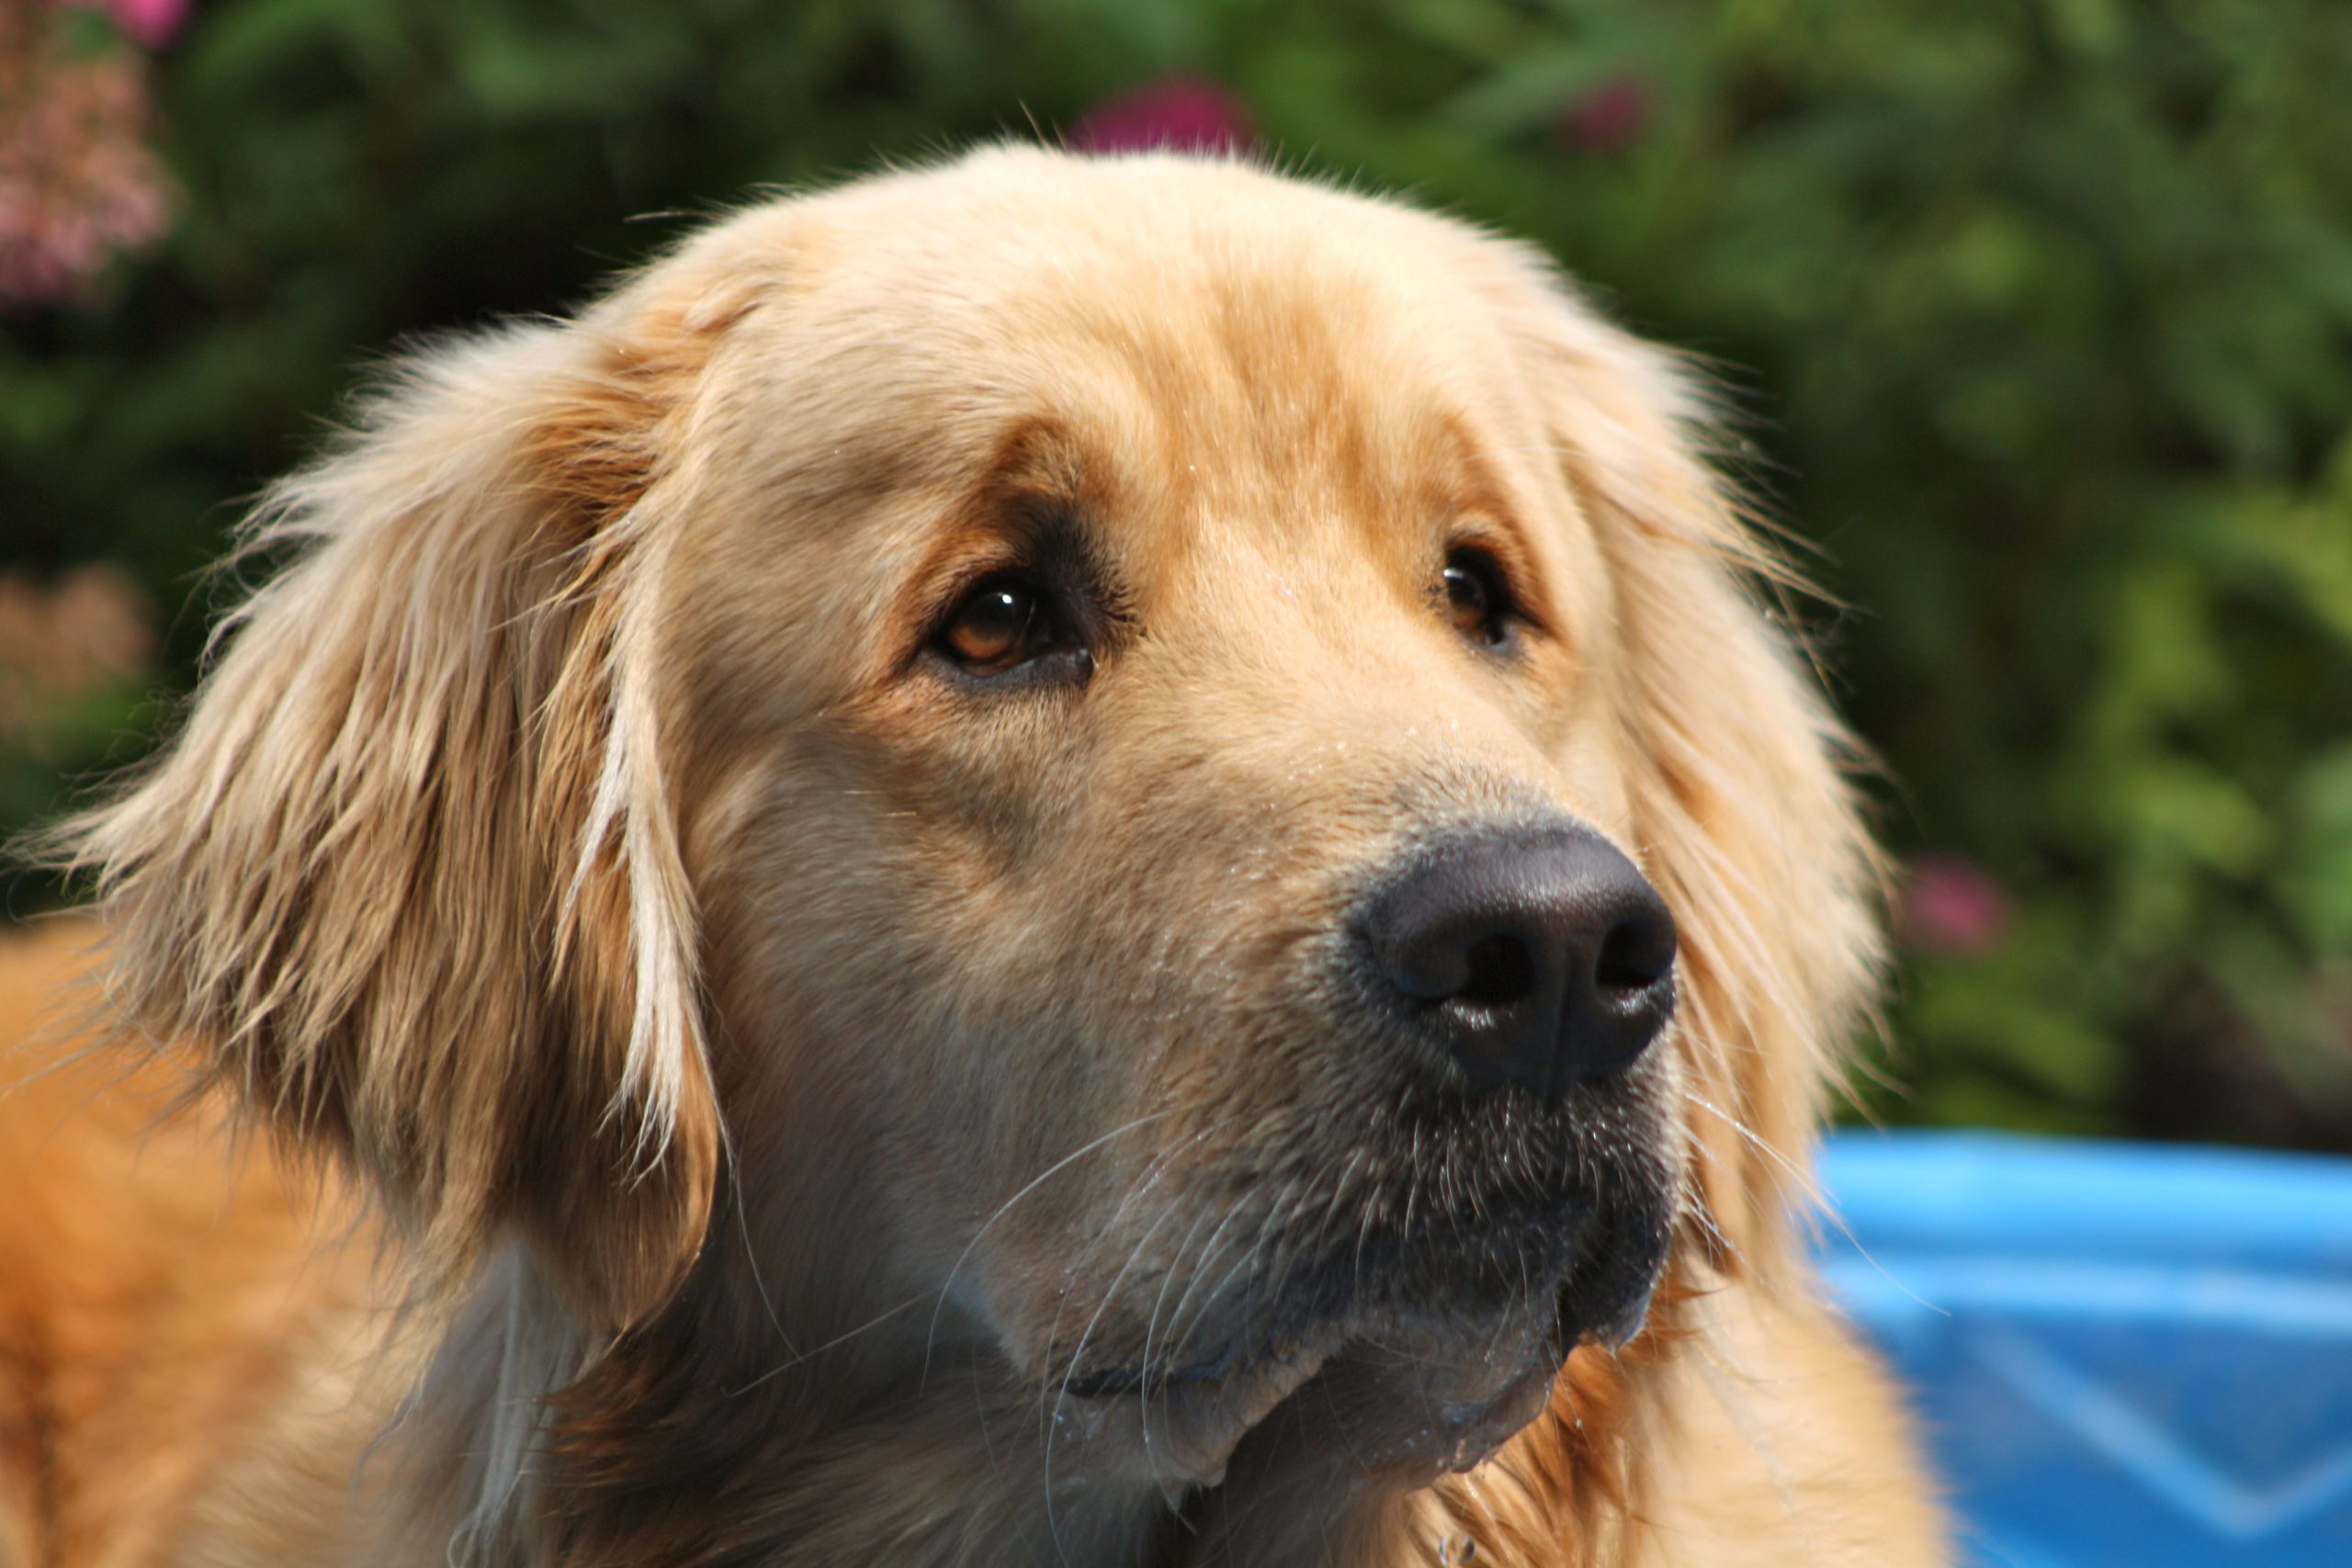 Picture of a Golden retriever in order to answer the question what do dogs see